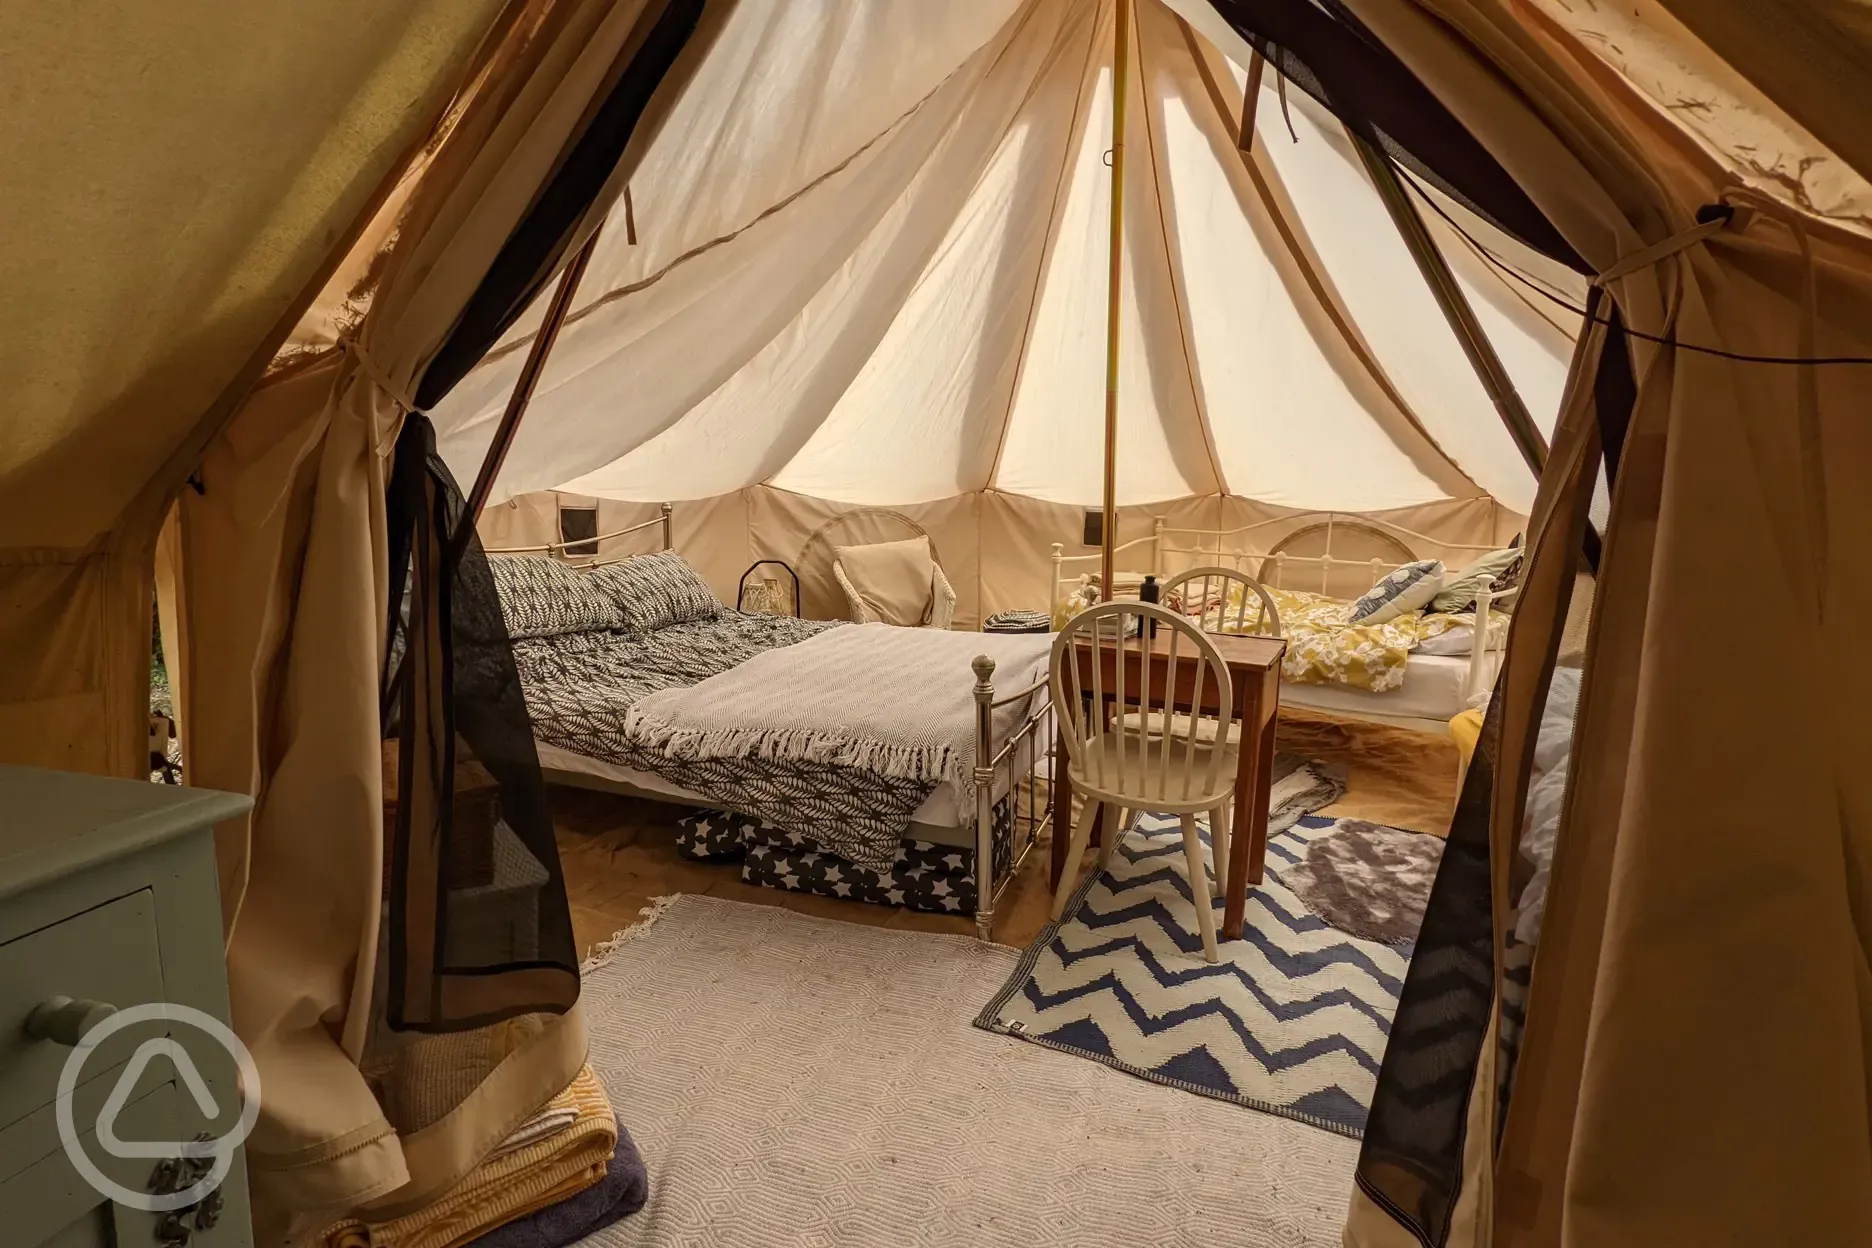 Fully furnished glamping